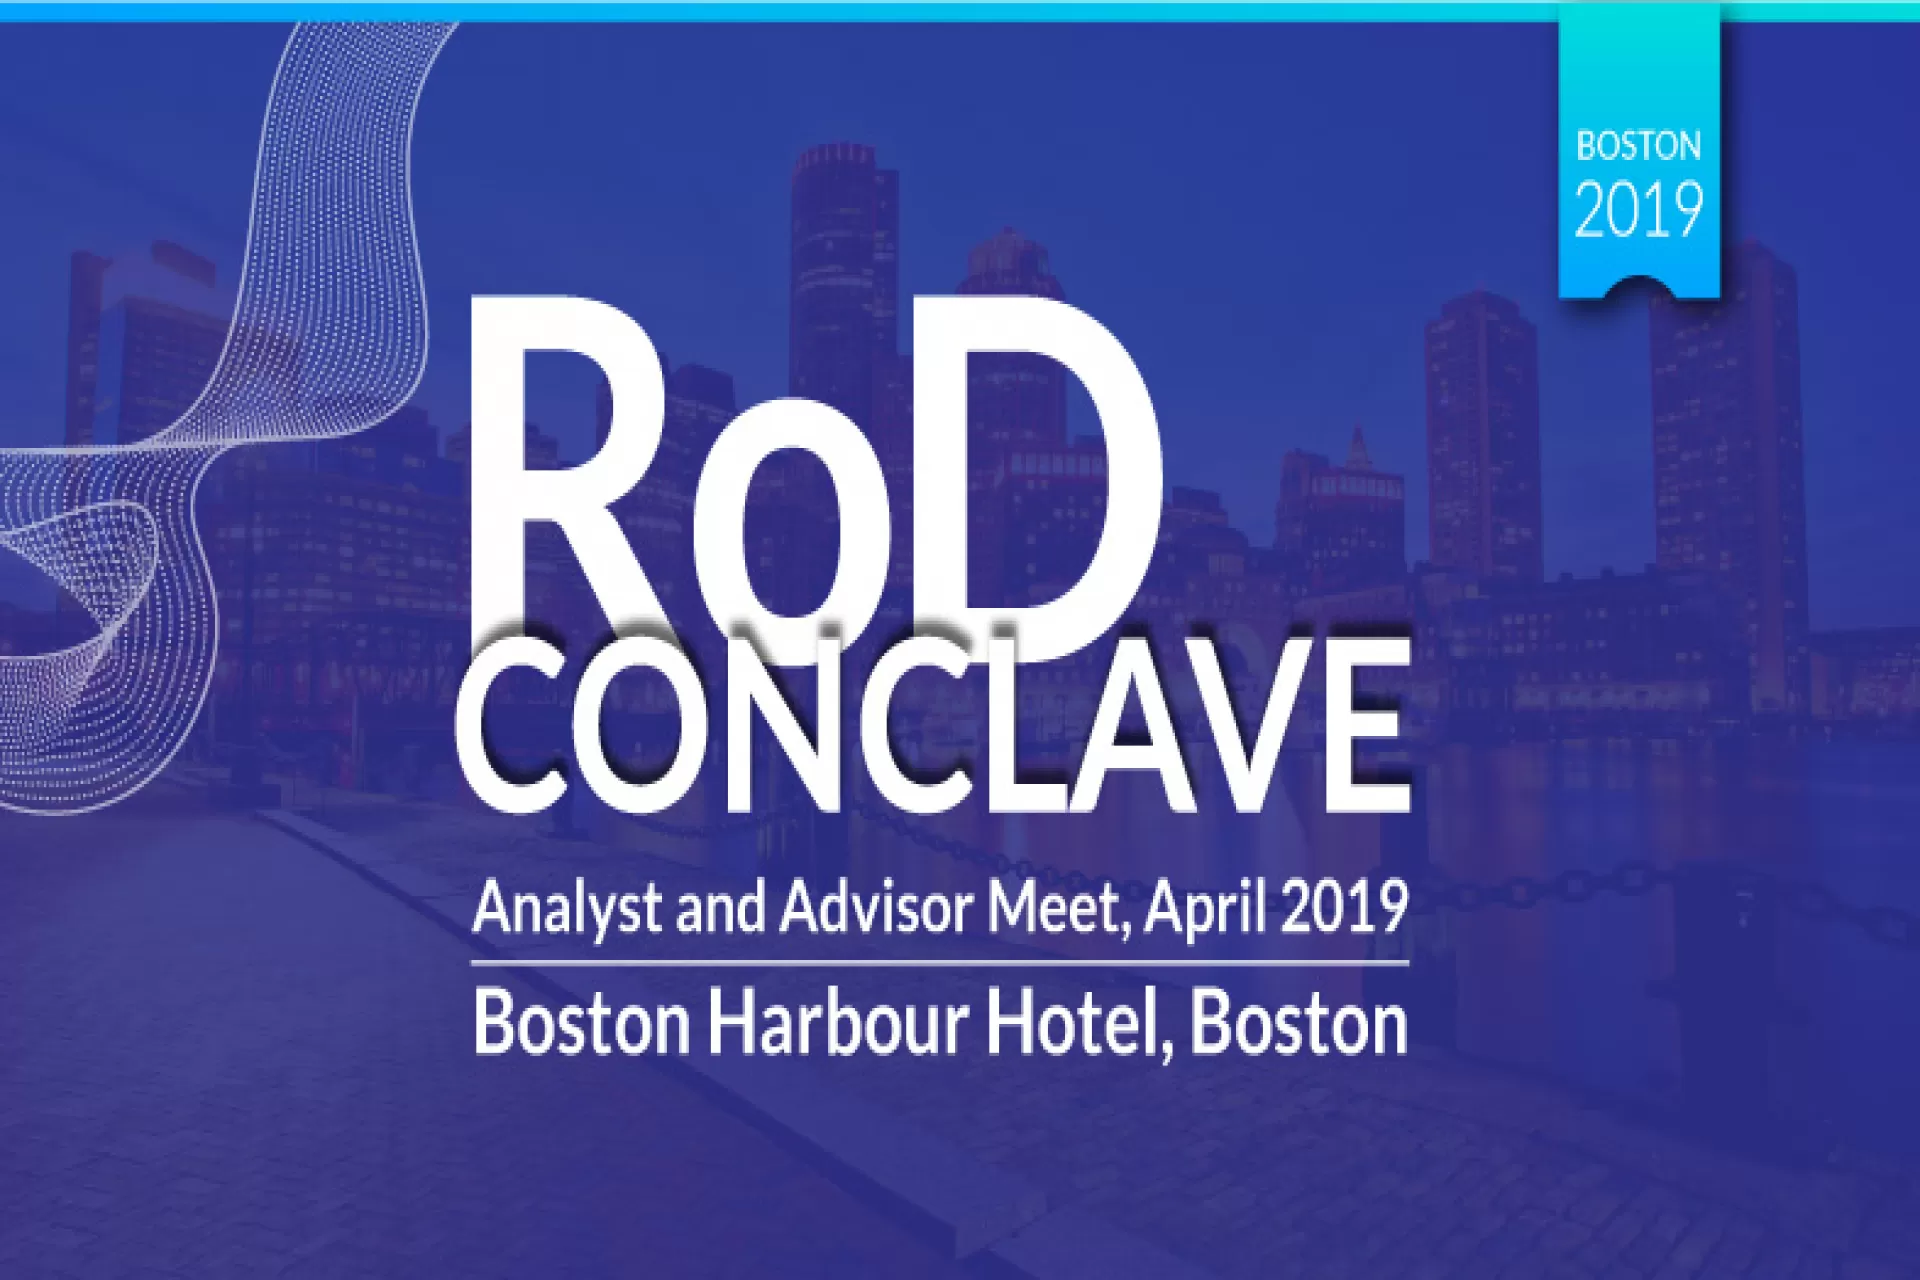  Global Data's coverage of RoD Conclave, 2019